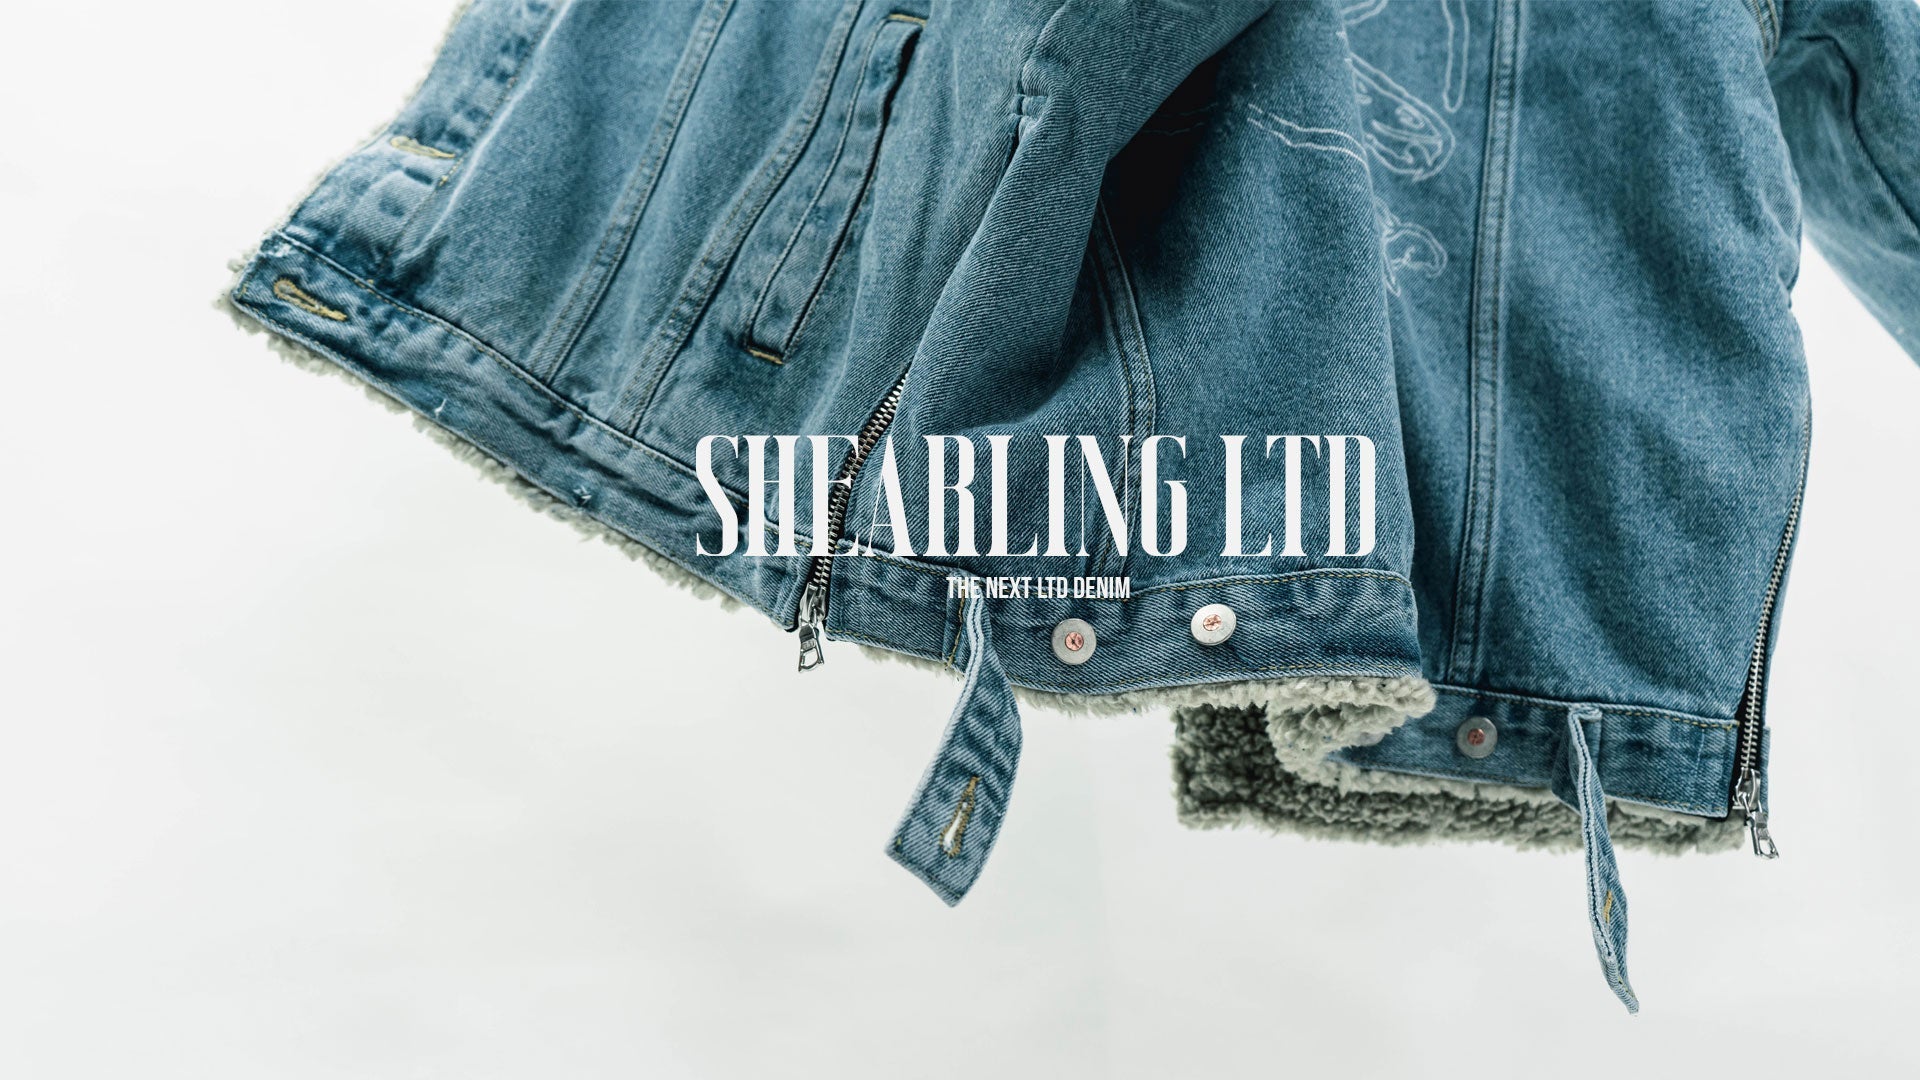 The Shearling LTD Denim - Blog post one - Wings Of Liberty Clothing